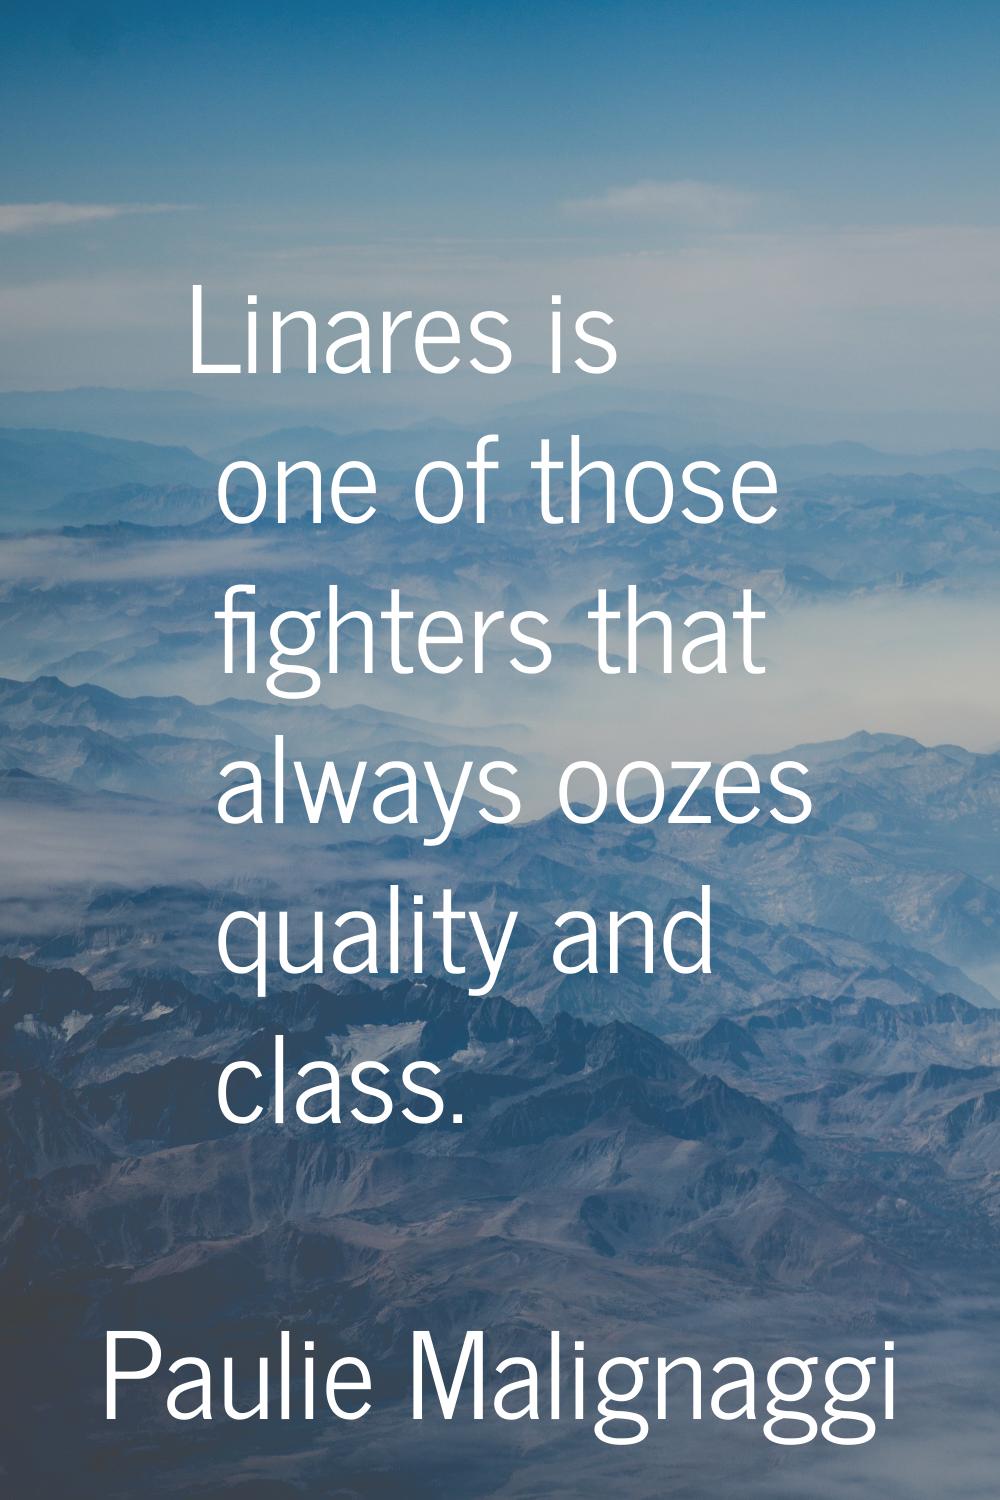 Linares is one of those fighters that always oozes quality and class.